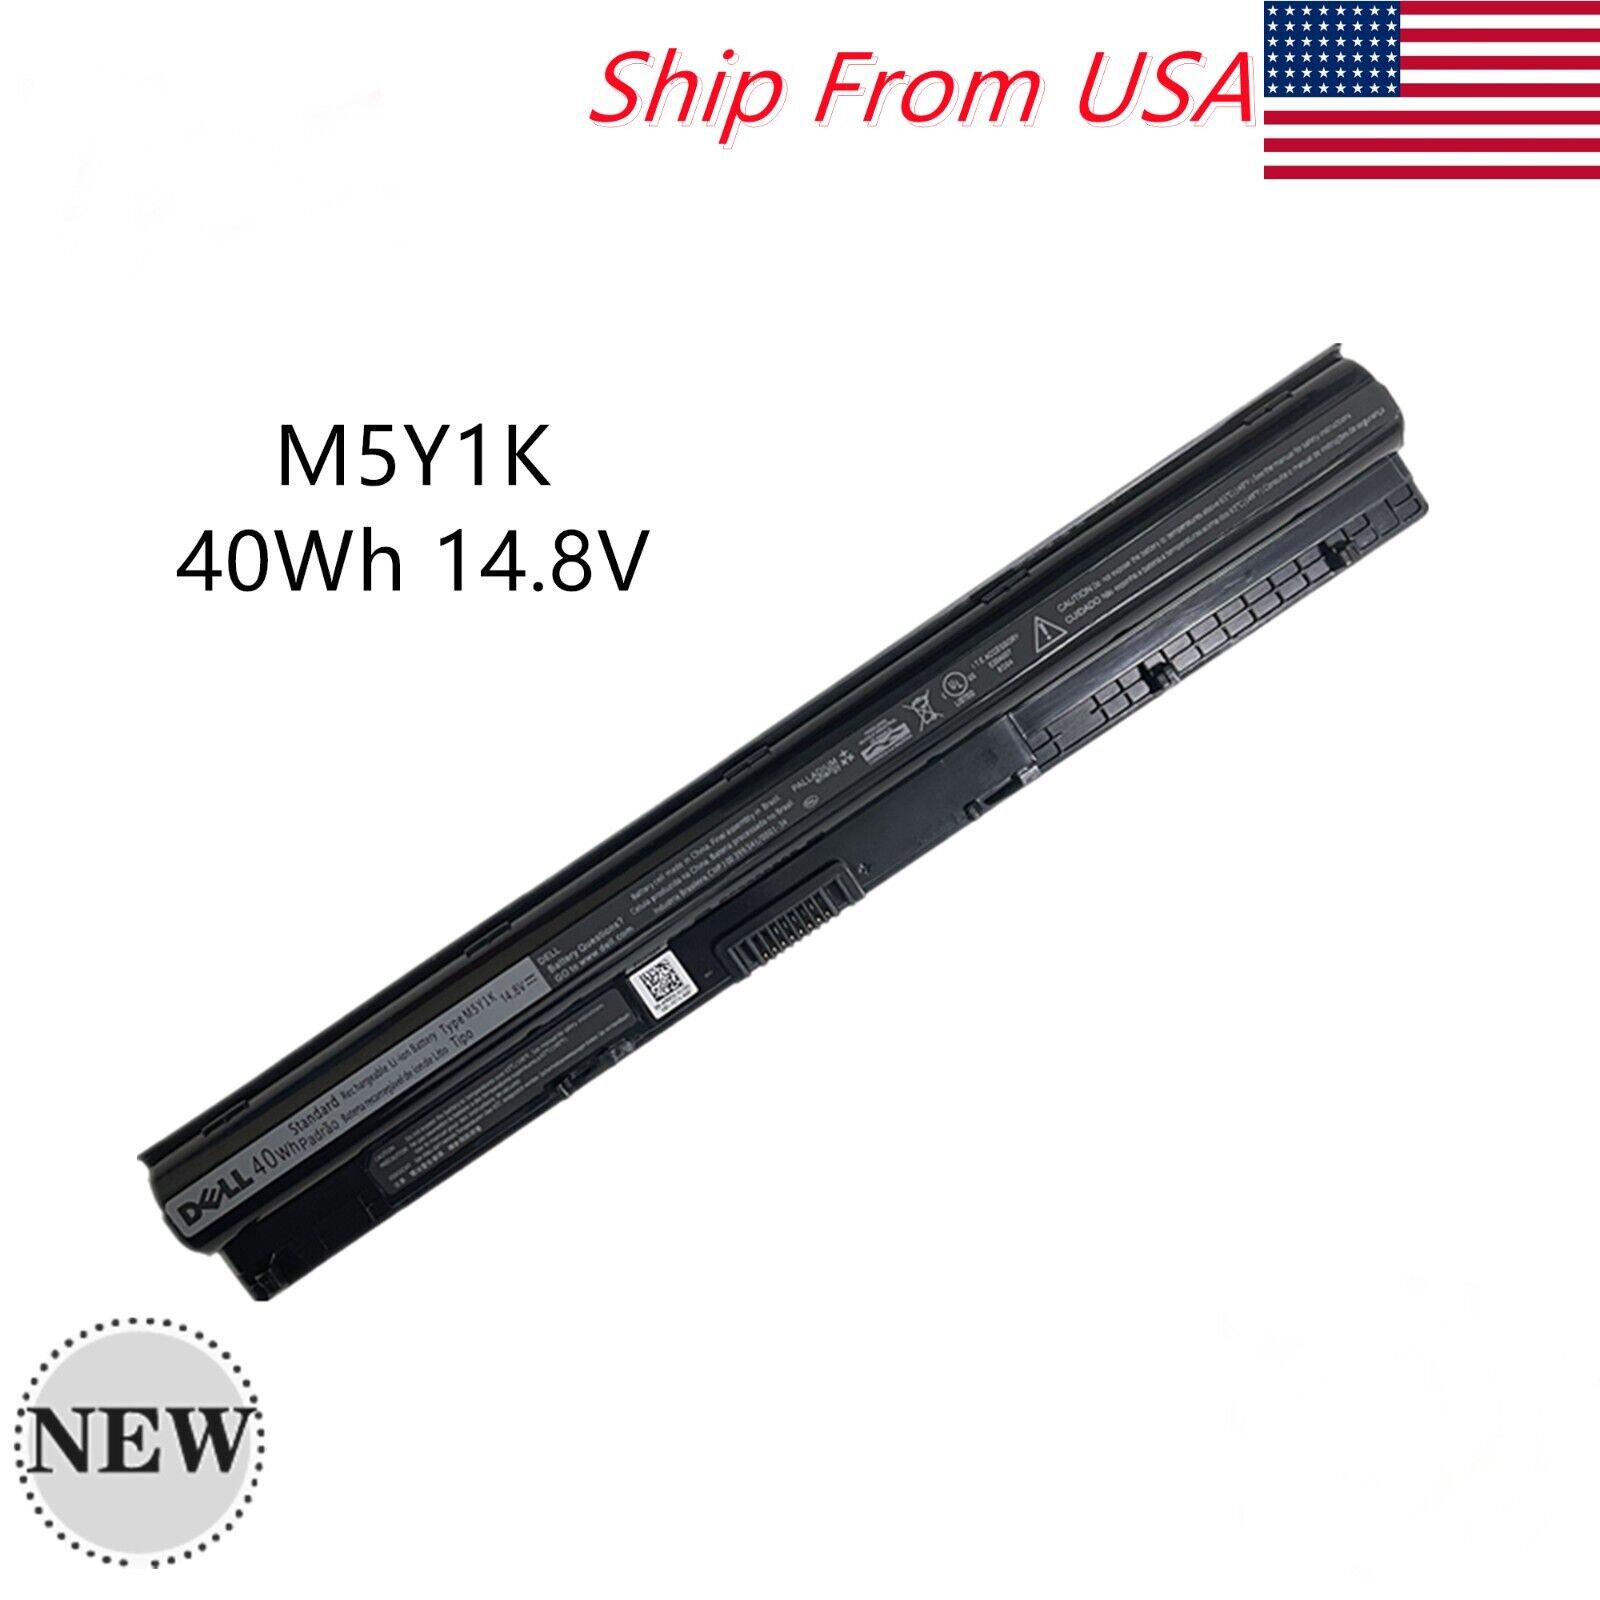 10 PACK NEW OEM 40Wh M5Y1K Battery For Dell Inspiron 3451 3458 5455 5551 5758